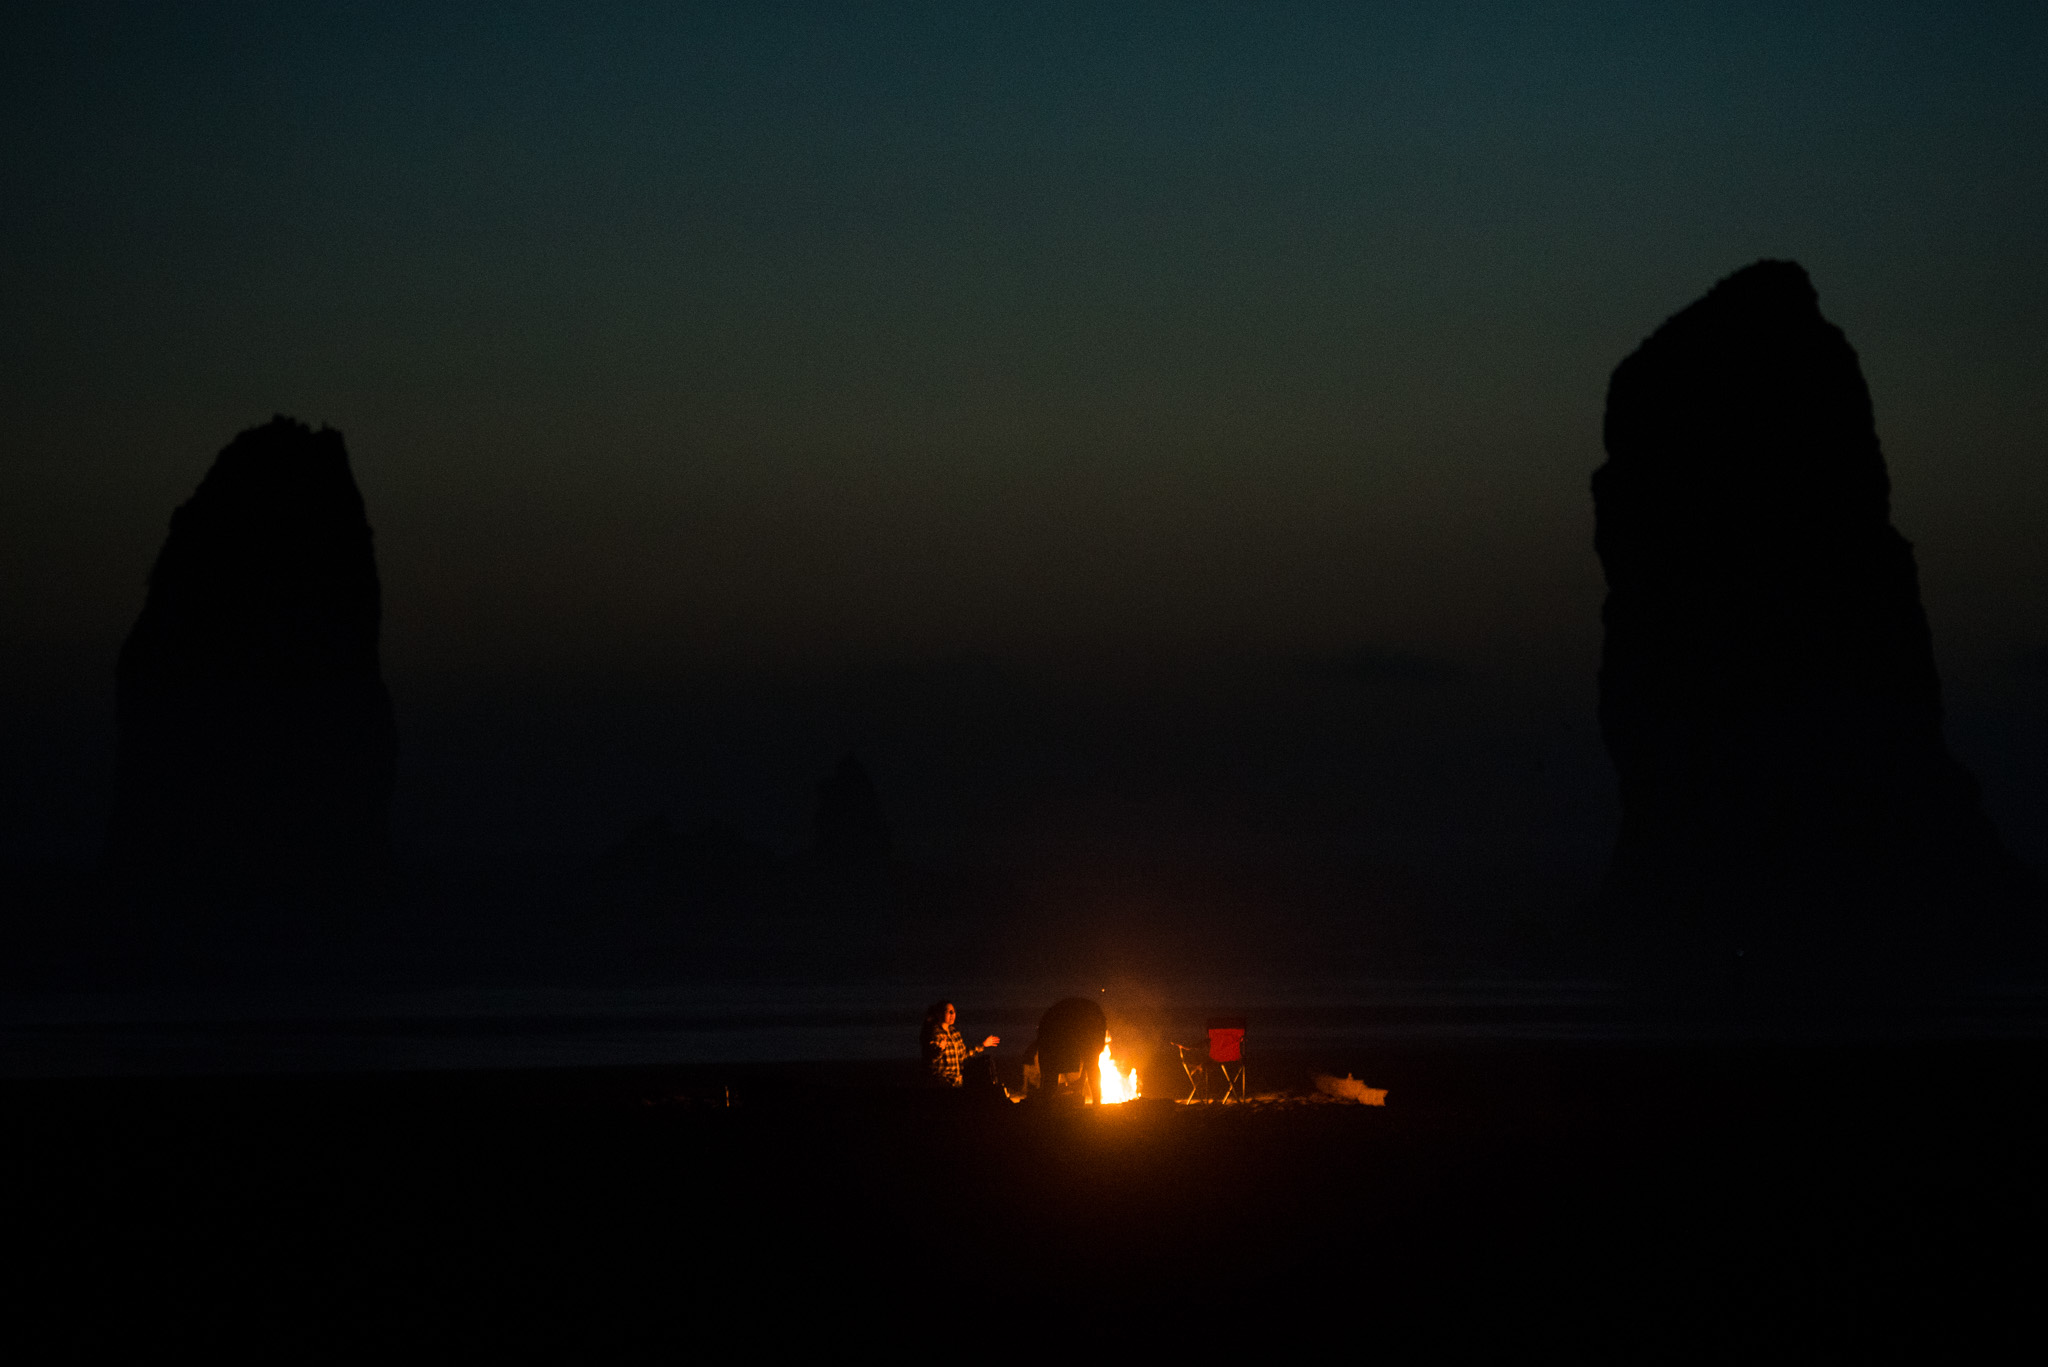  Campfires on the beach with the giant rock formations looming in the background.&nbsp; 